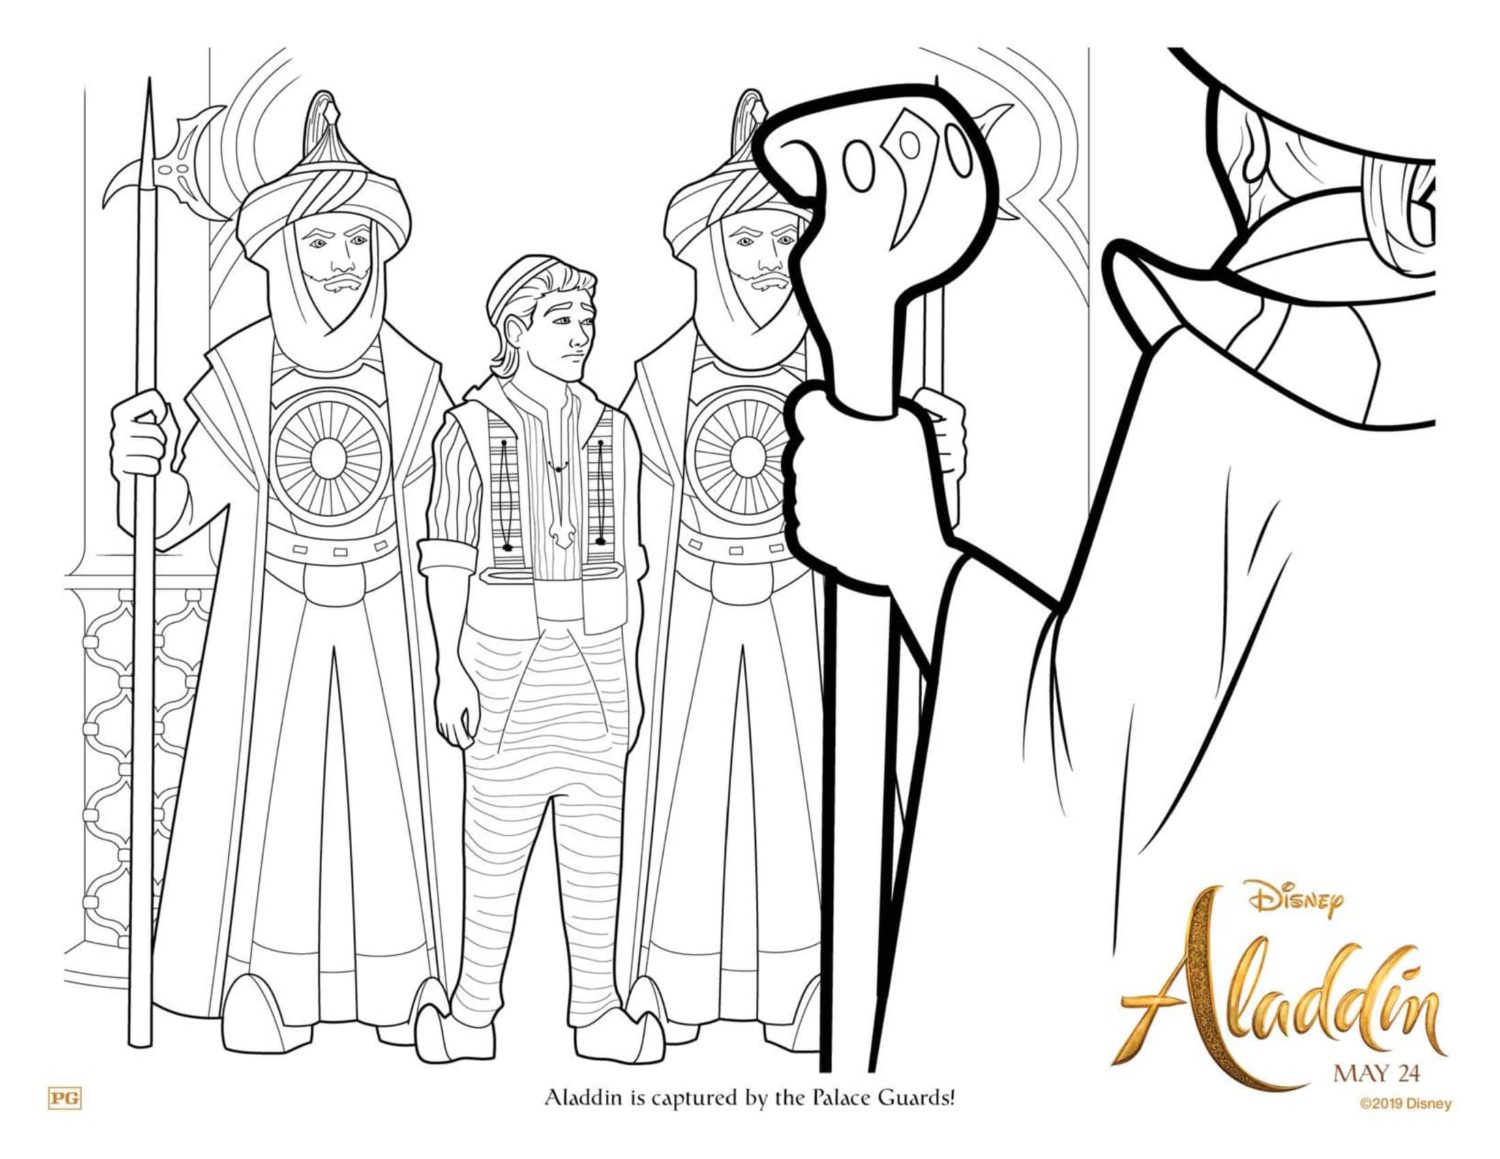 Aladdin Captured by Palace Guards Coloring Page and Activity Sheet